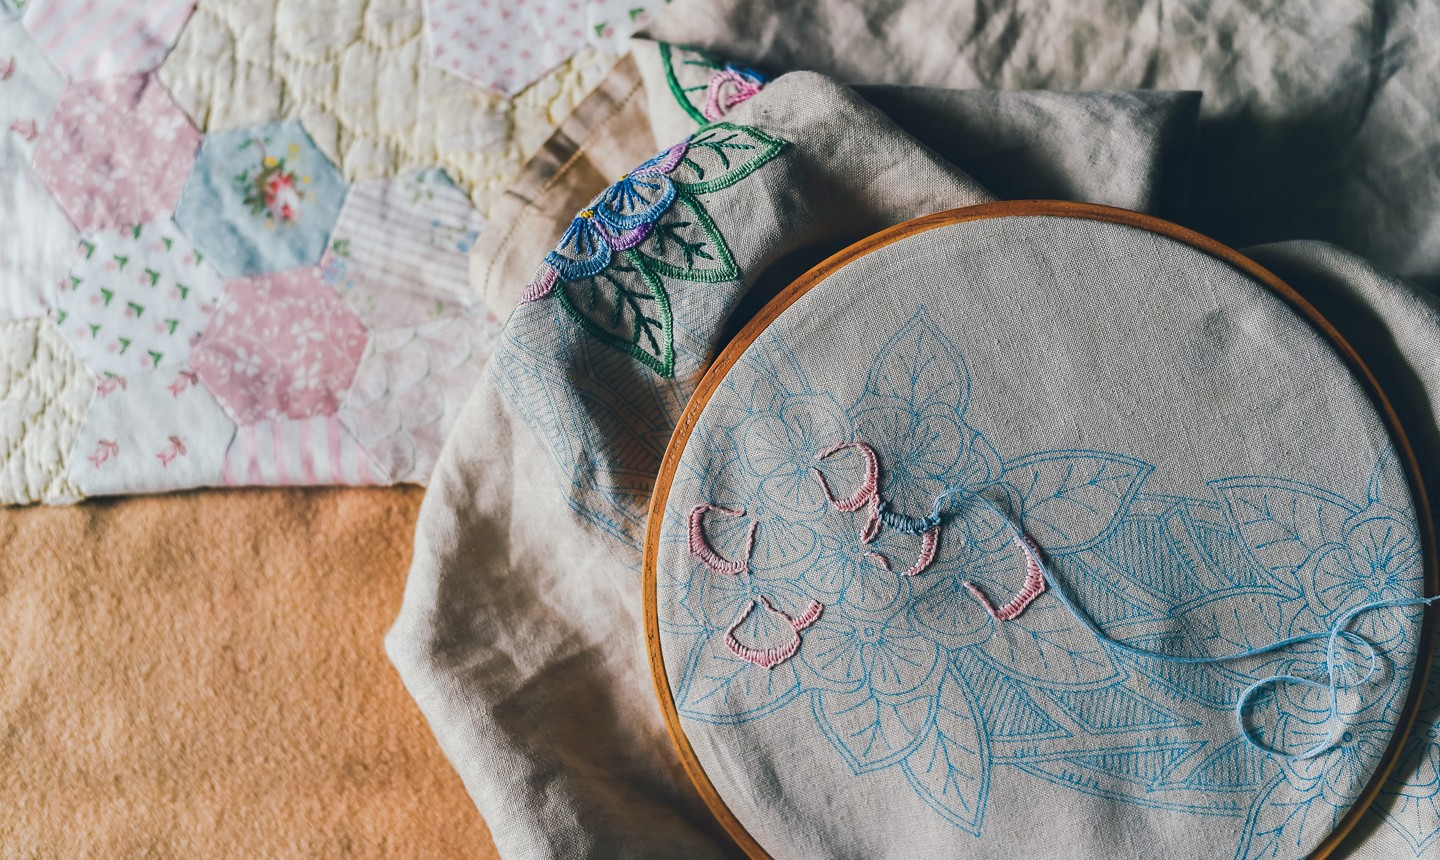 Transfer Embroidery Pattern To Fabric 5 Simple Ways To Transfer Embroidery Designs